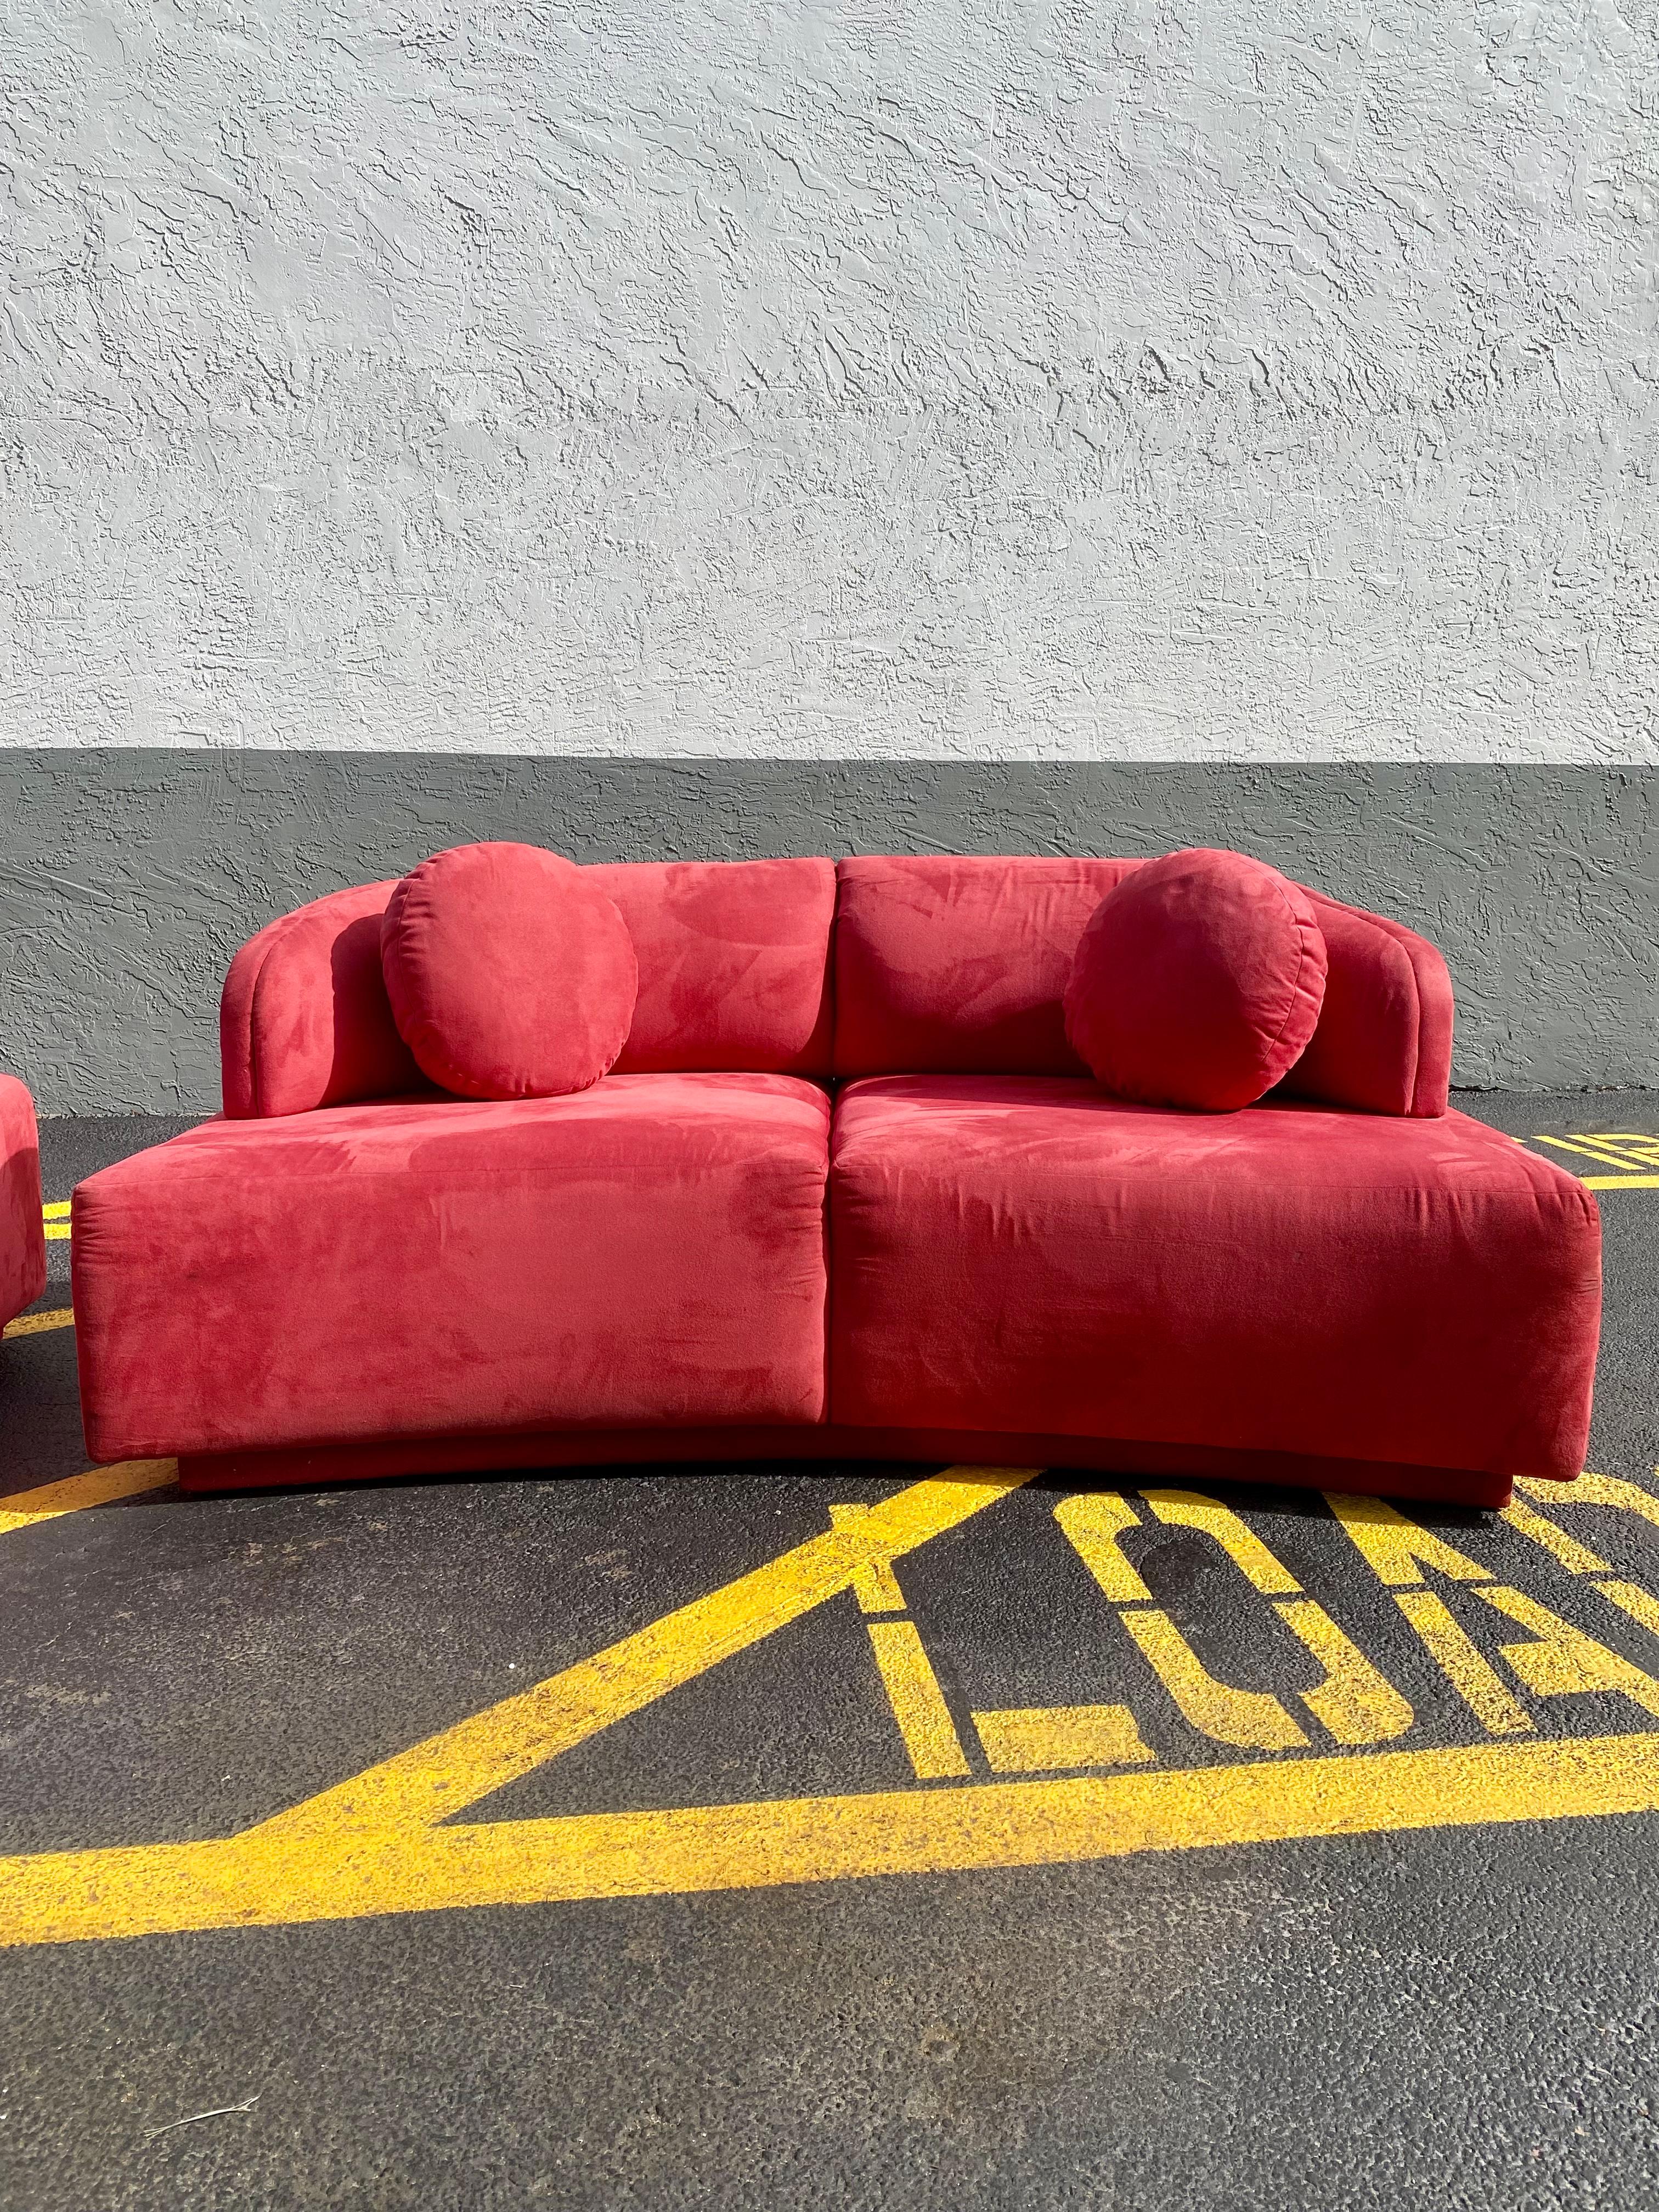 1980s Sculptural Weiman Red Cloud Sofa Loveseat, Set of 2 In Good Condition For Sale In Fort Lauderdale, FL